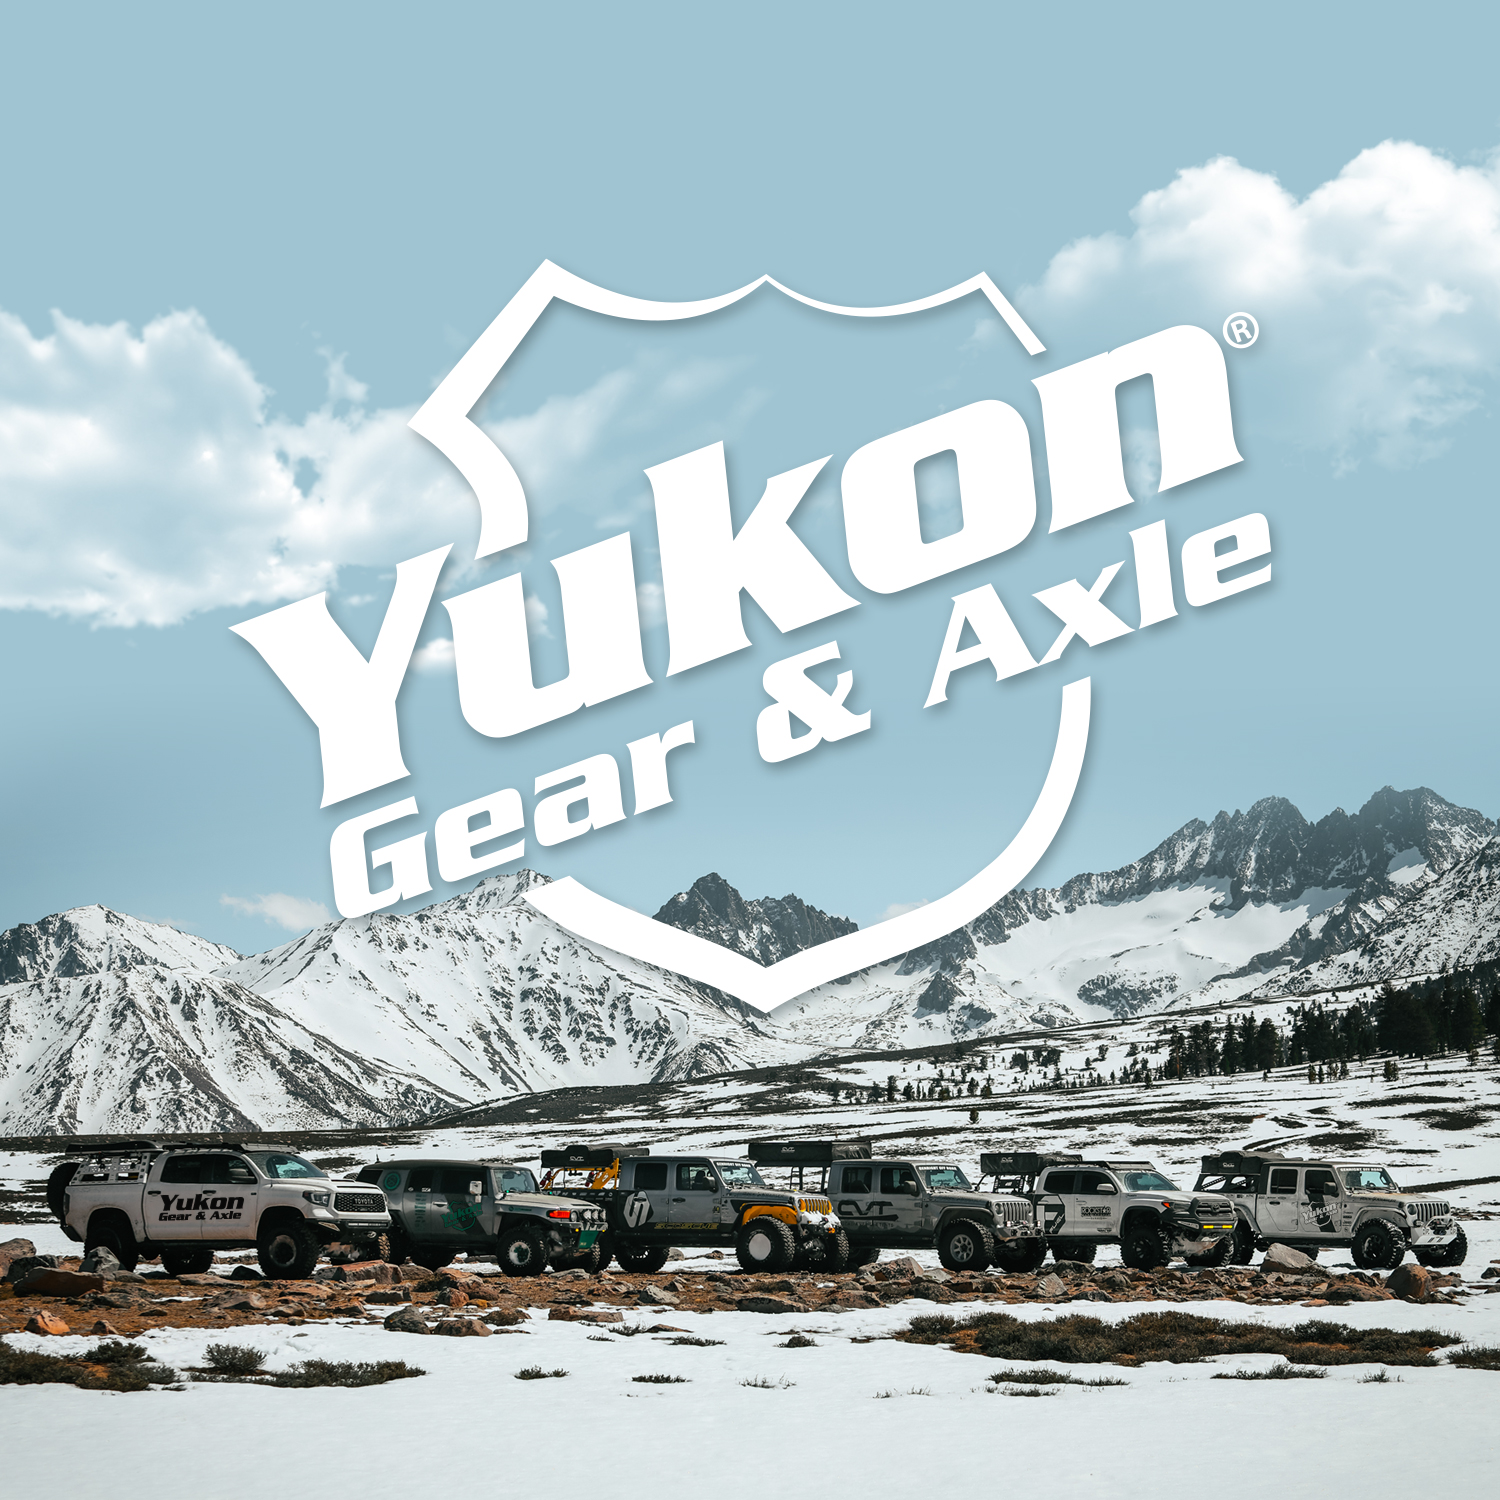 Yukon yoke for Model 20 with a 1310 U/Joint size. 